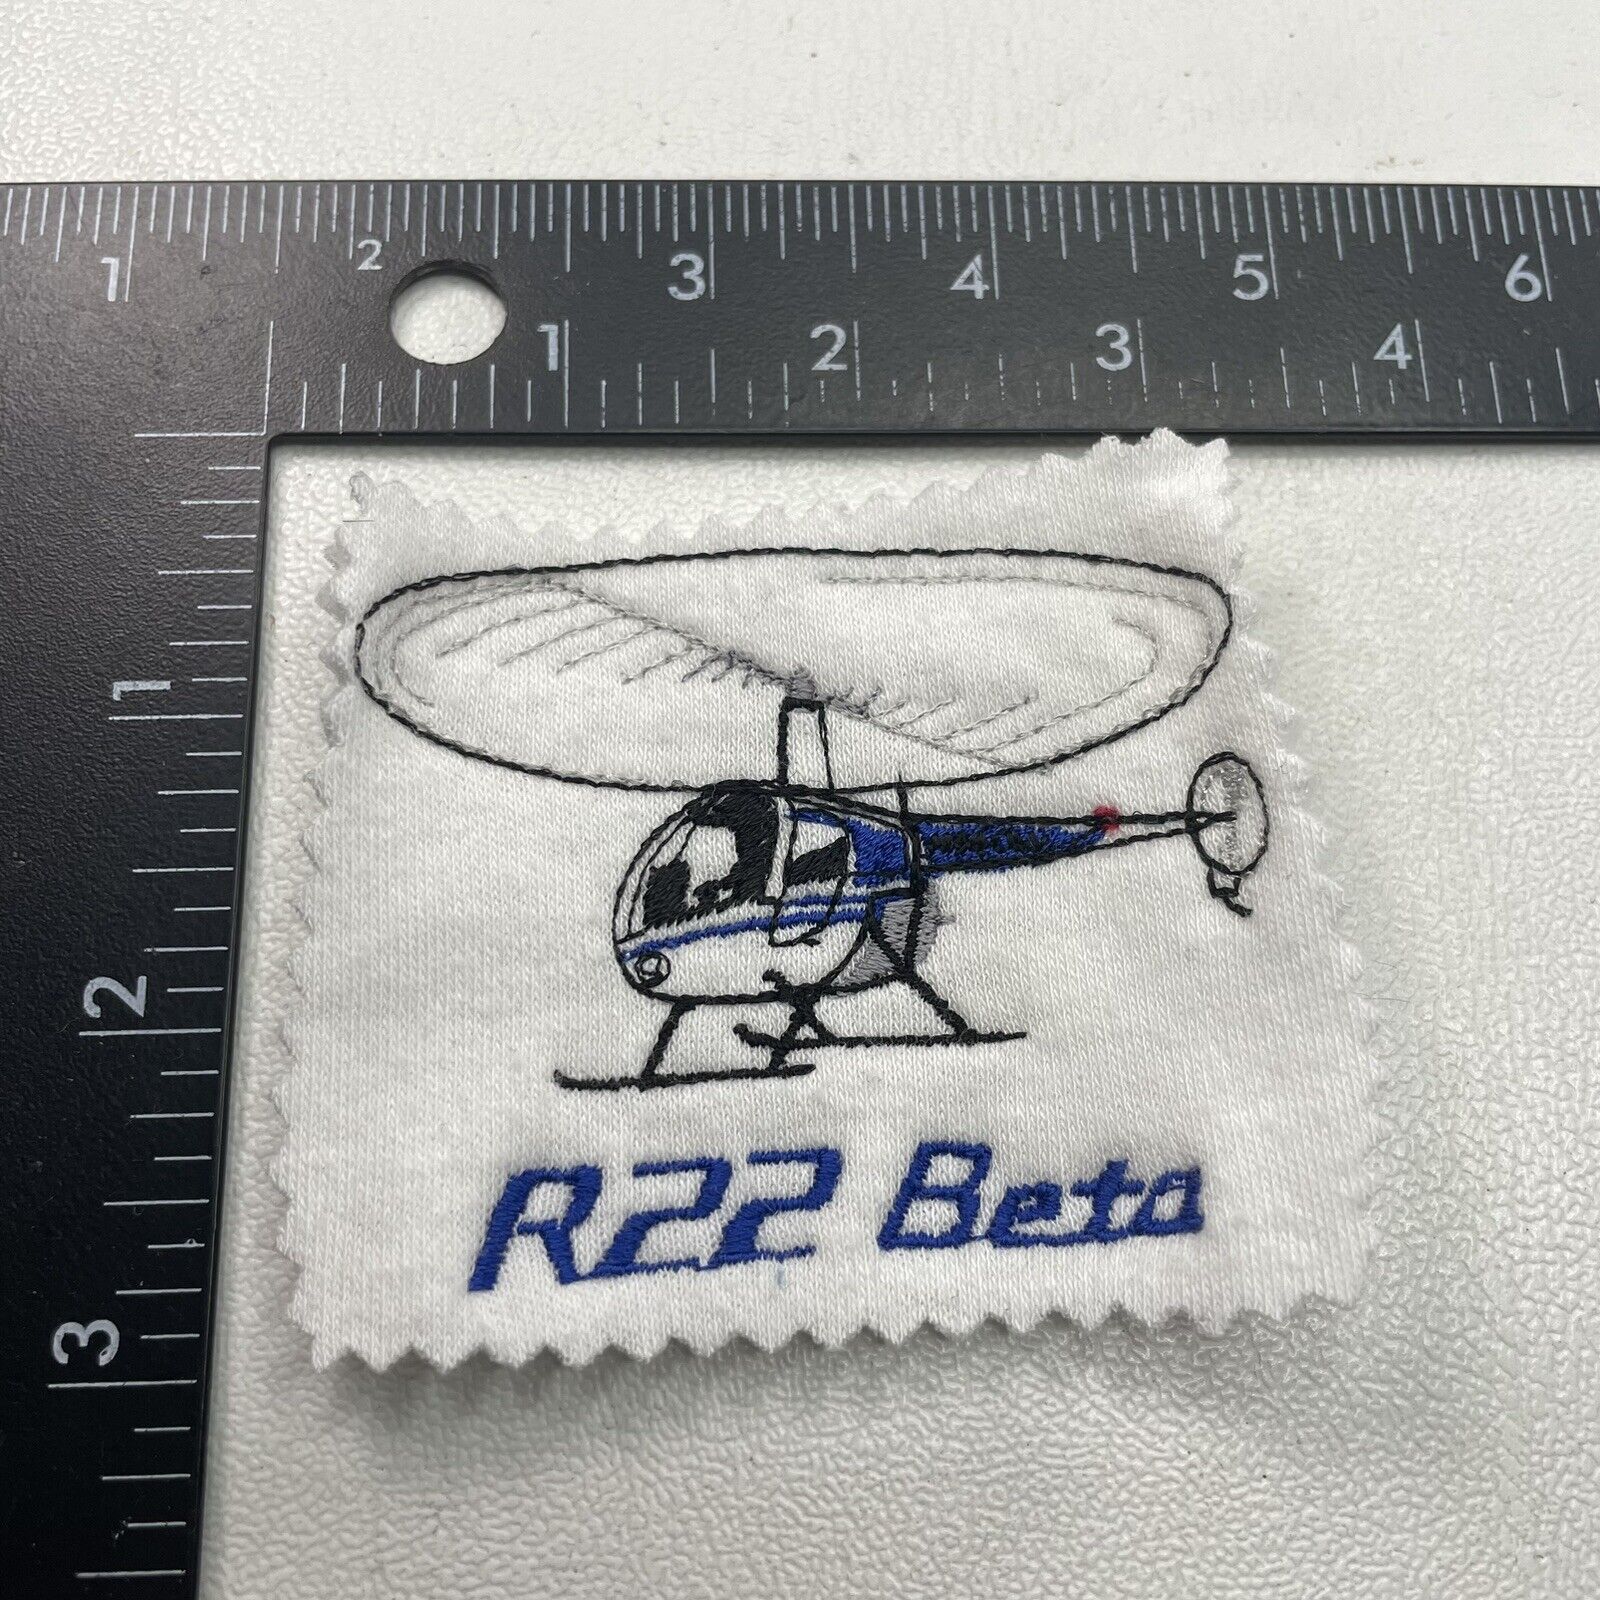 Zig-Zag-Cut-From-Clothing Patch-ish Piece R22 BETA HELICOPTER (Robinson) 32R6